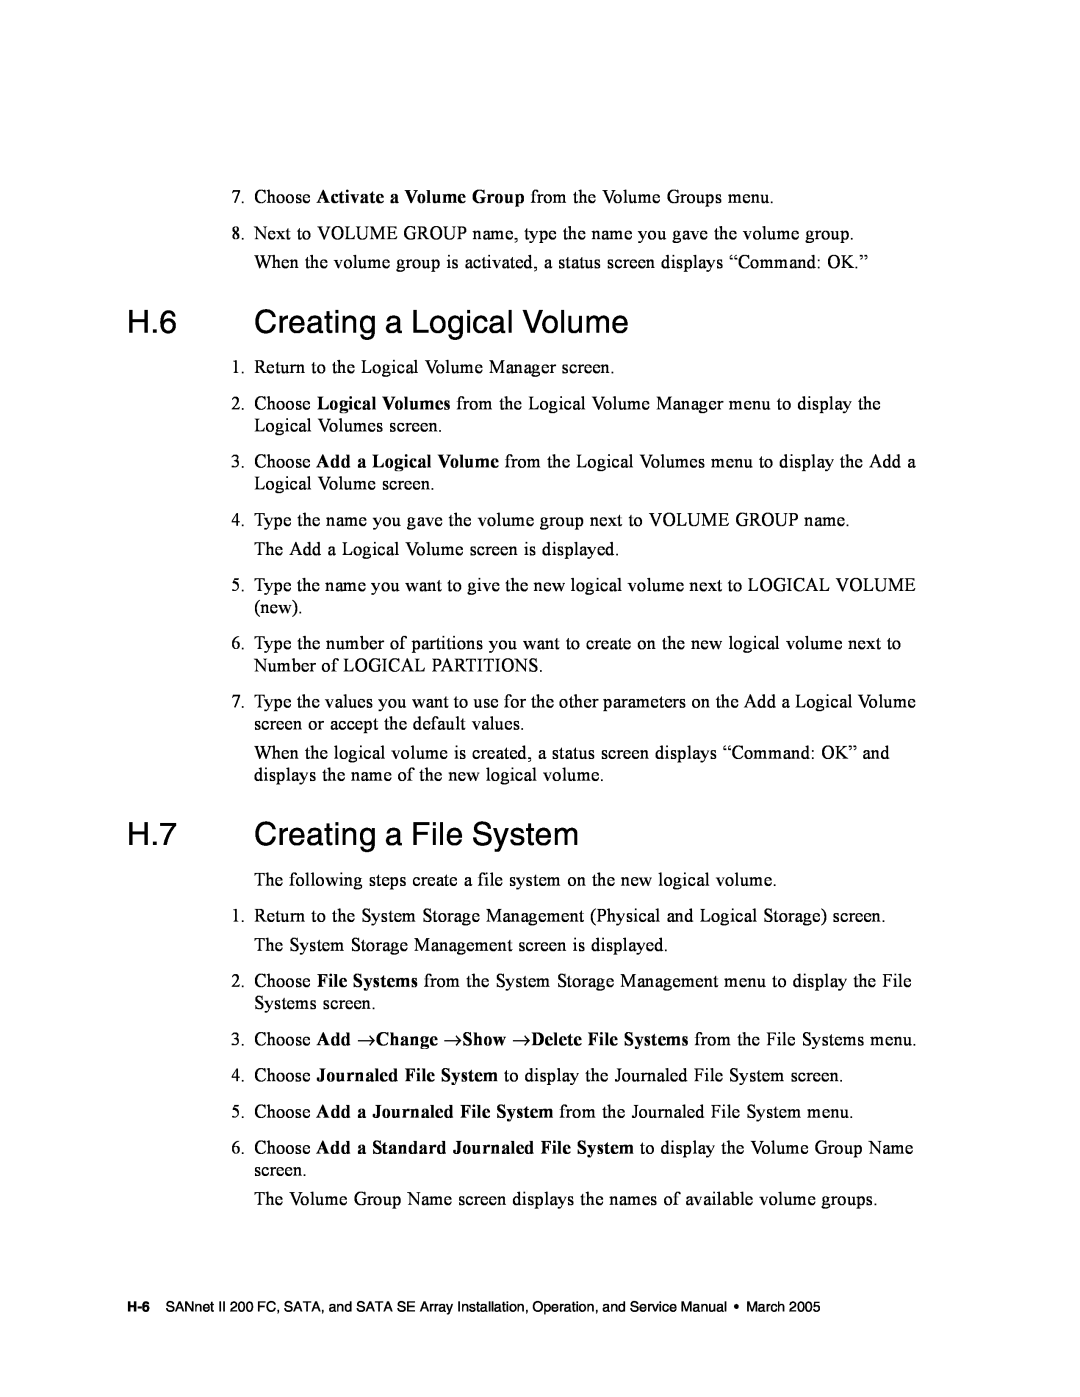 Dot Hill Systems II 200 FC service manual H.6 Creating a Logical Volume, H.7 Creating a File System 